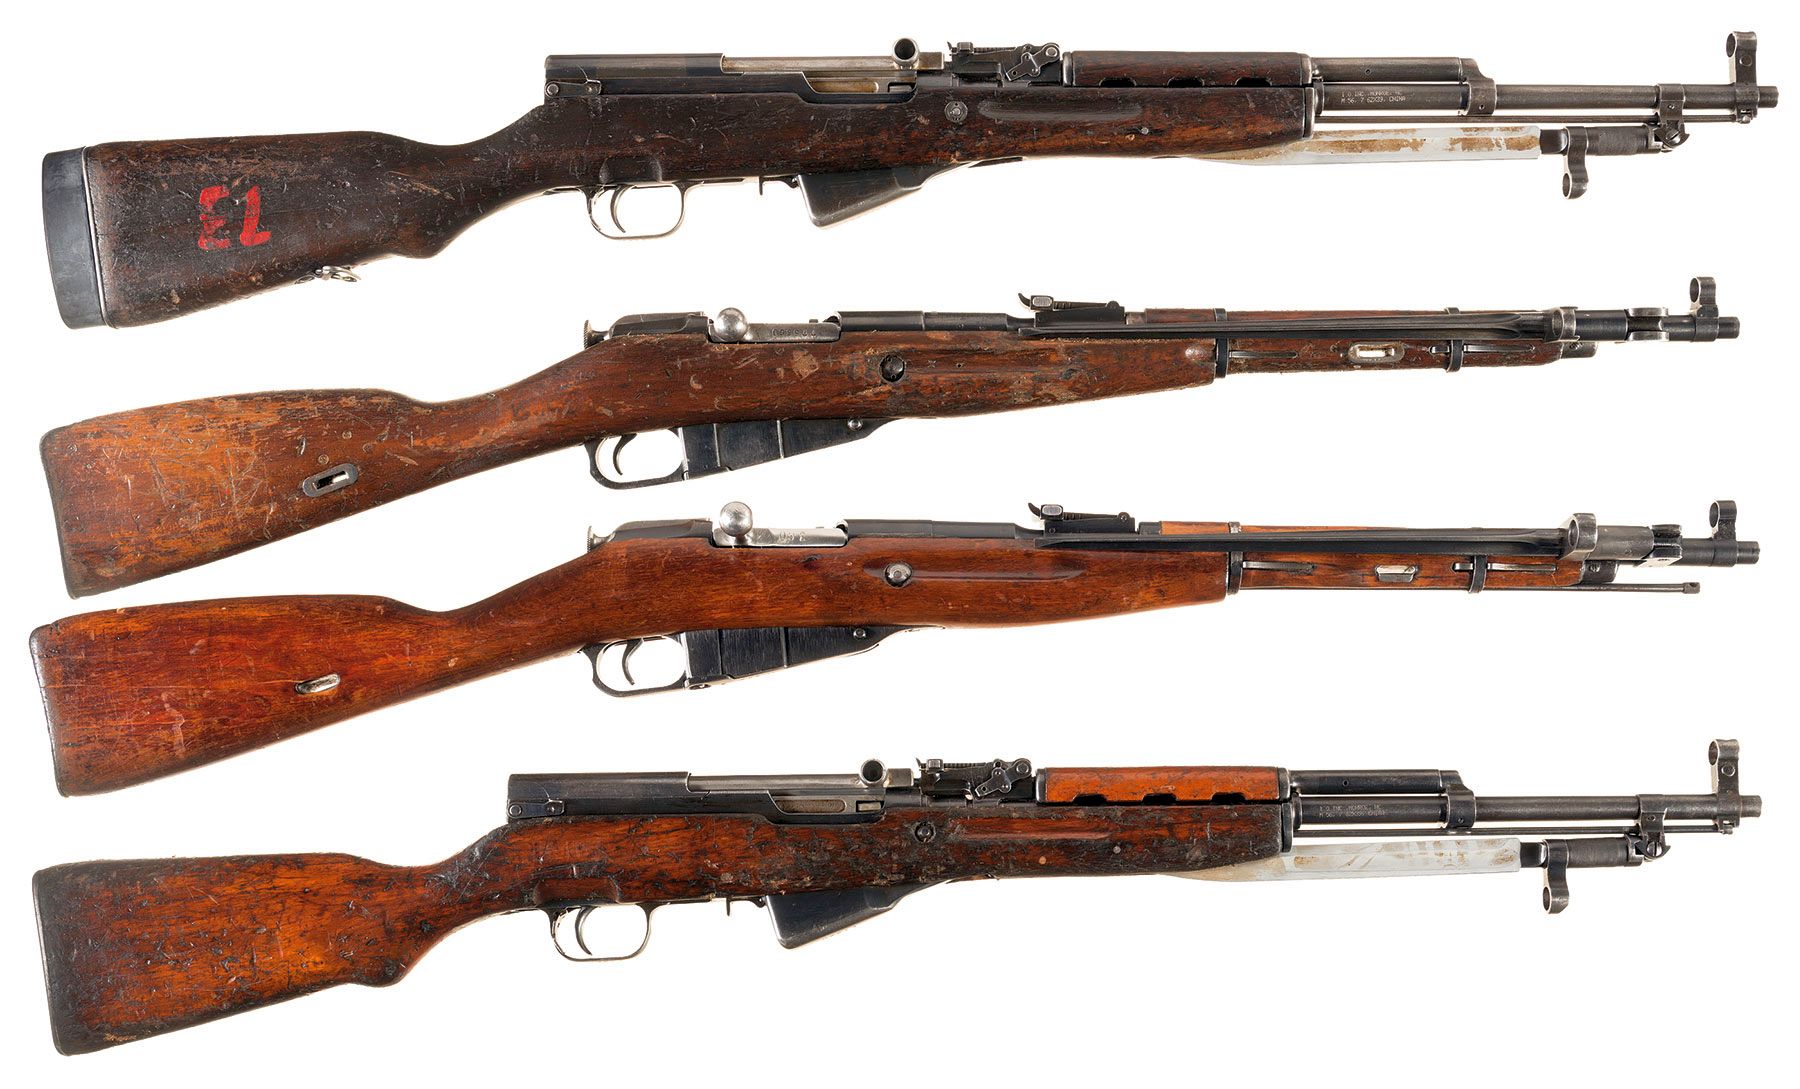 Lot 475: Two Nagant M44 Carbines and Two SKS RiflesLot 475: Two Nagant M44 Carbines and Two SKS Rifles